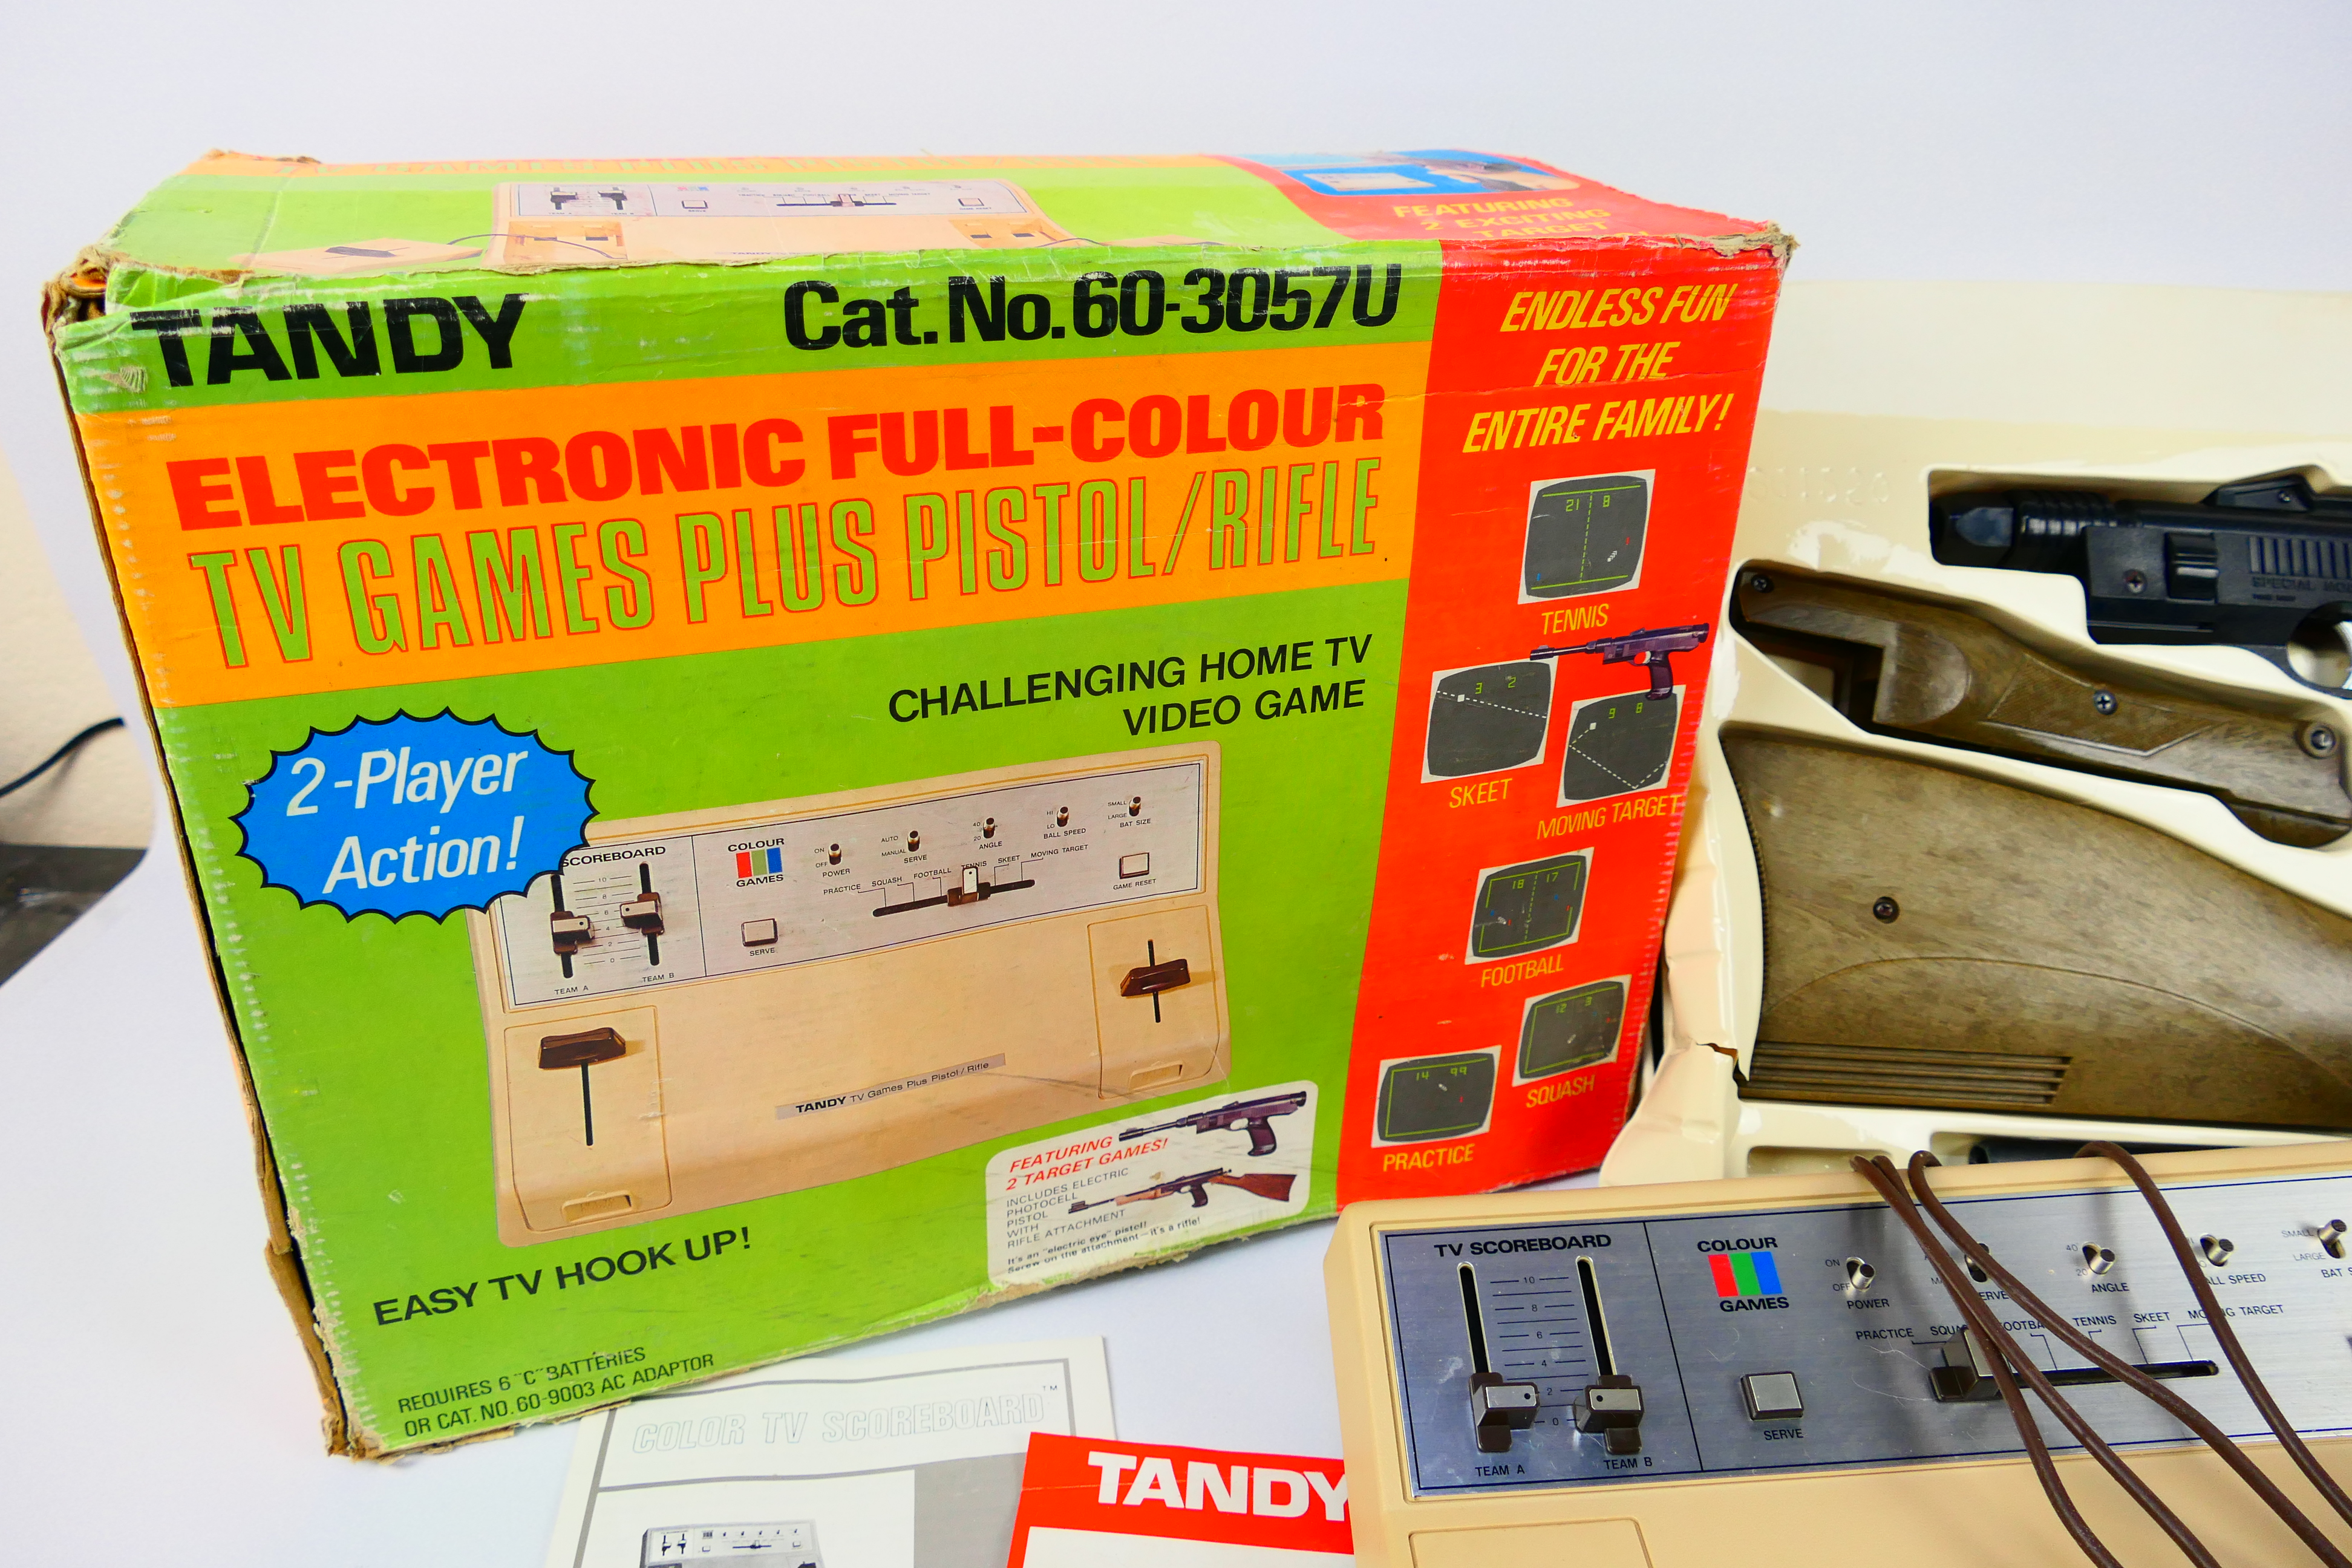 Tandy - A vintage Electronic Full Colour Pistol/Rifle game - Comes with pistol and rifle attachment. - Bild 4 aus 5